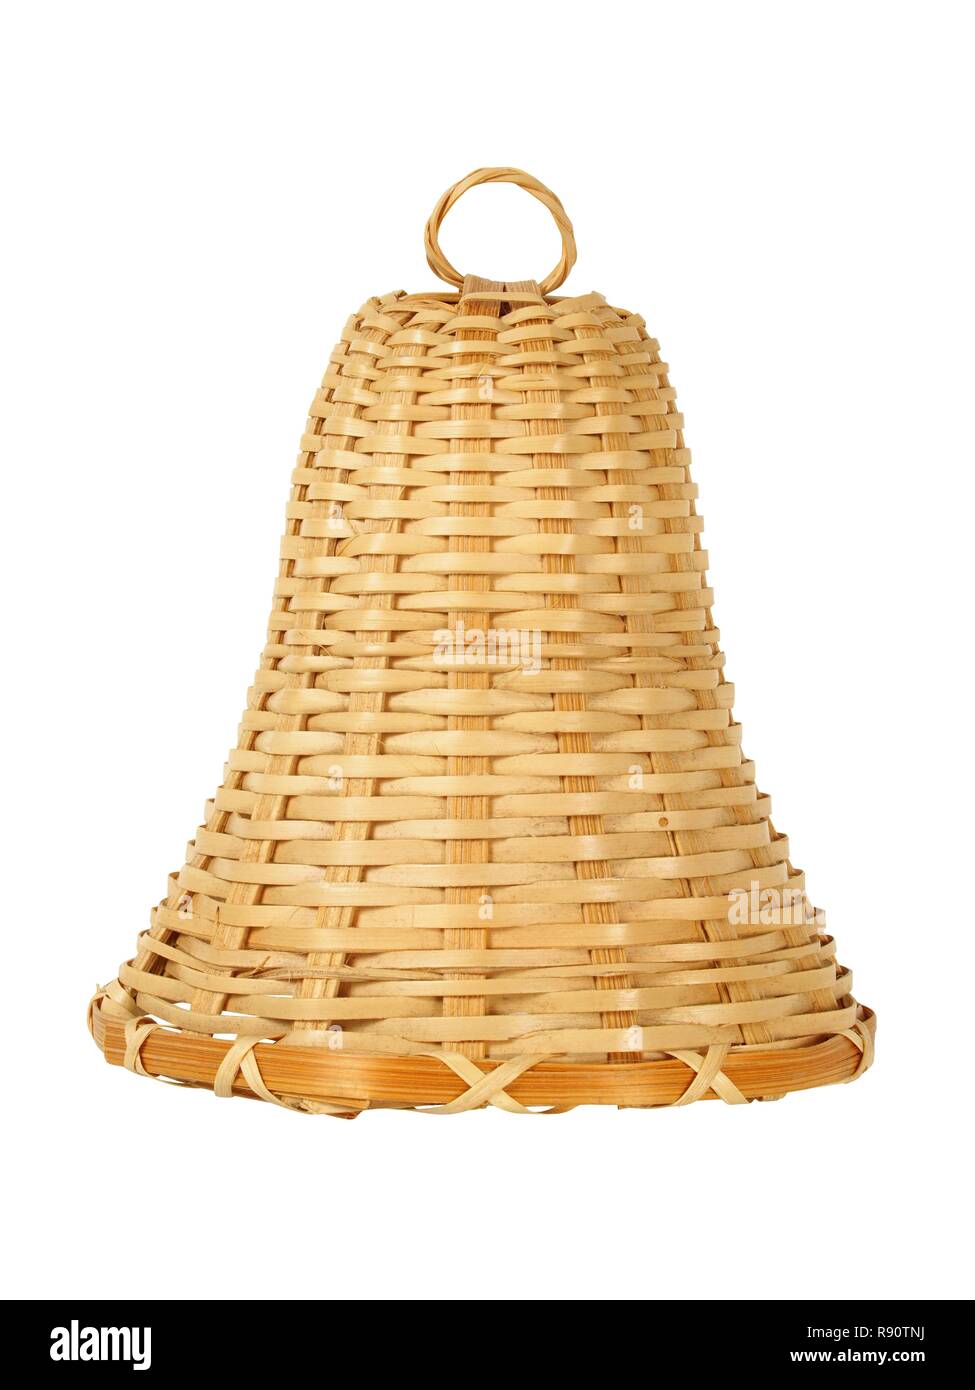 Wicker bell on white, can be used as Christmas tree decoration Stock Photo